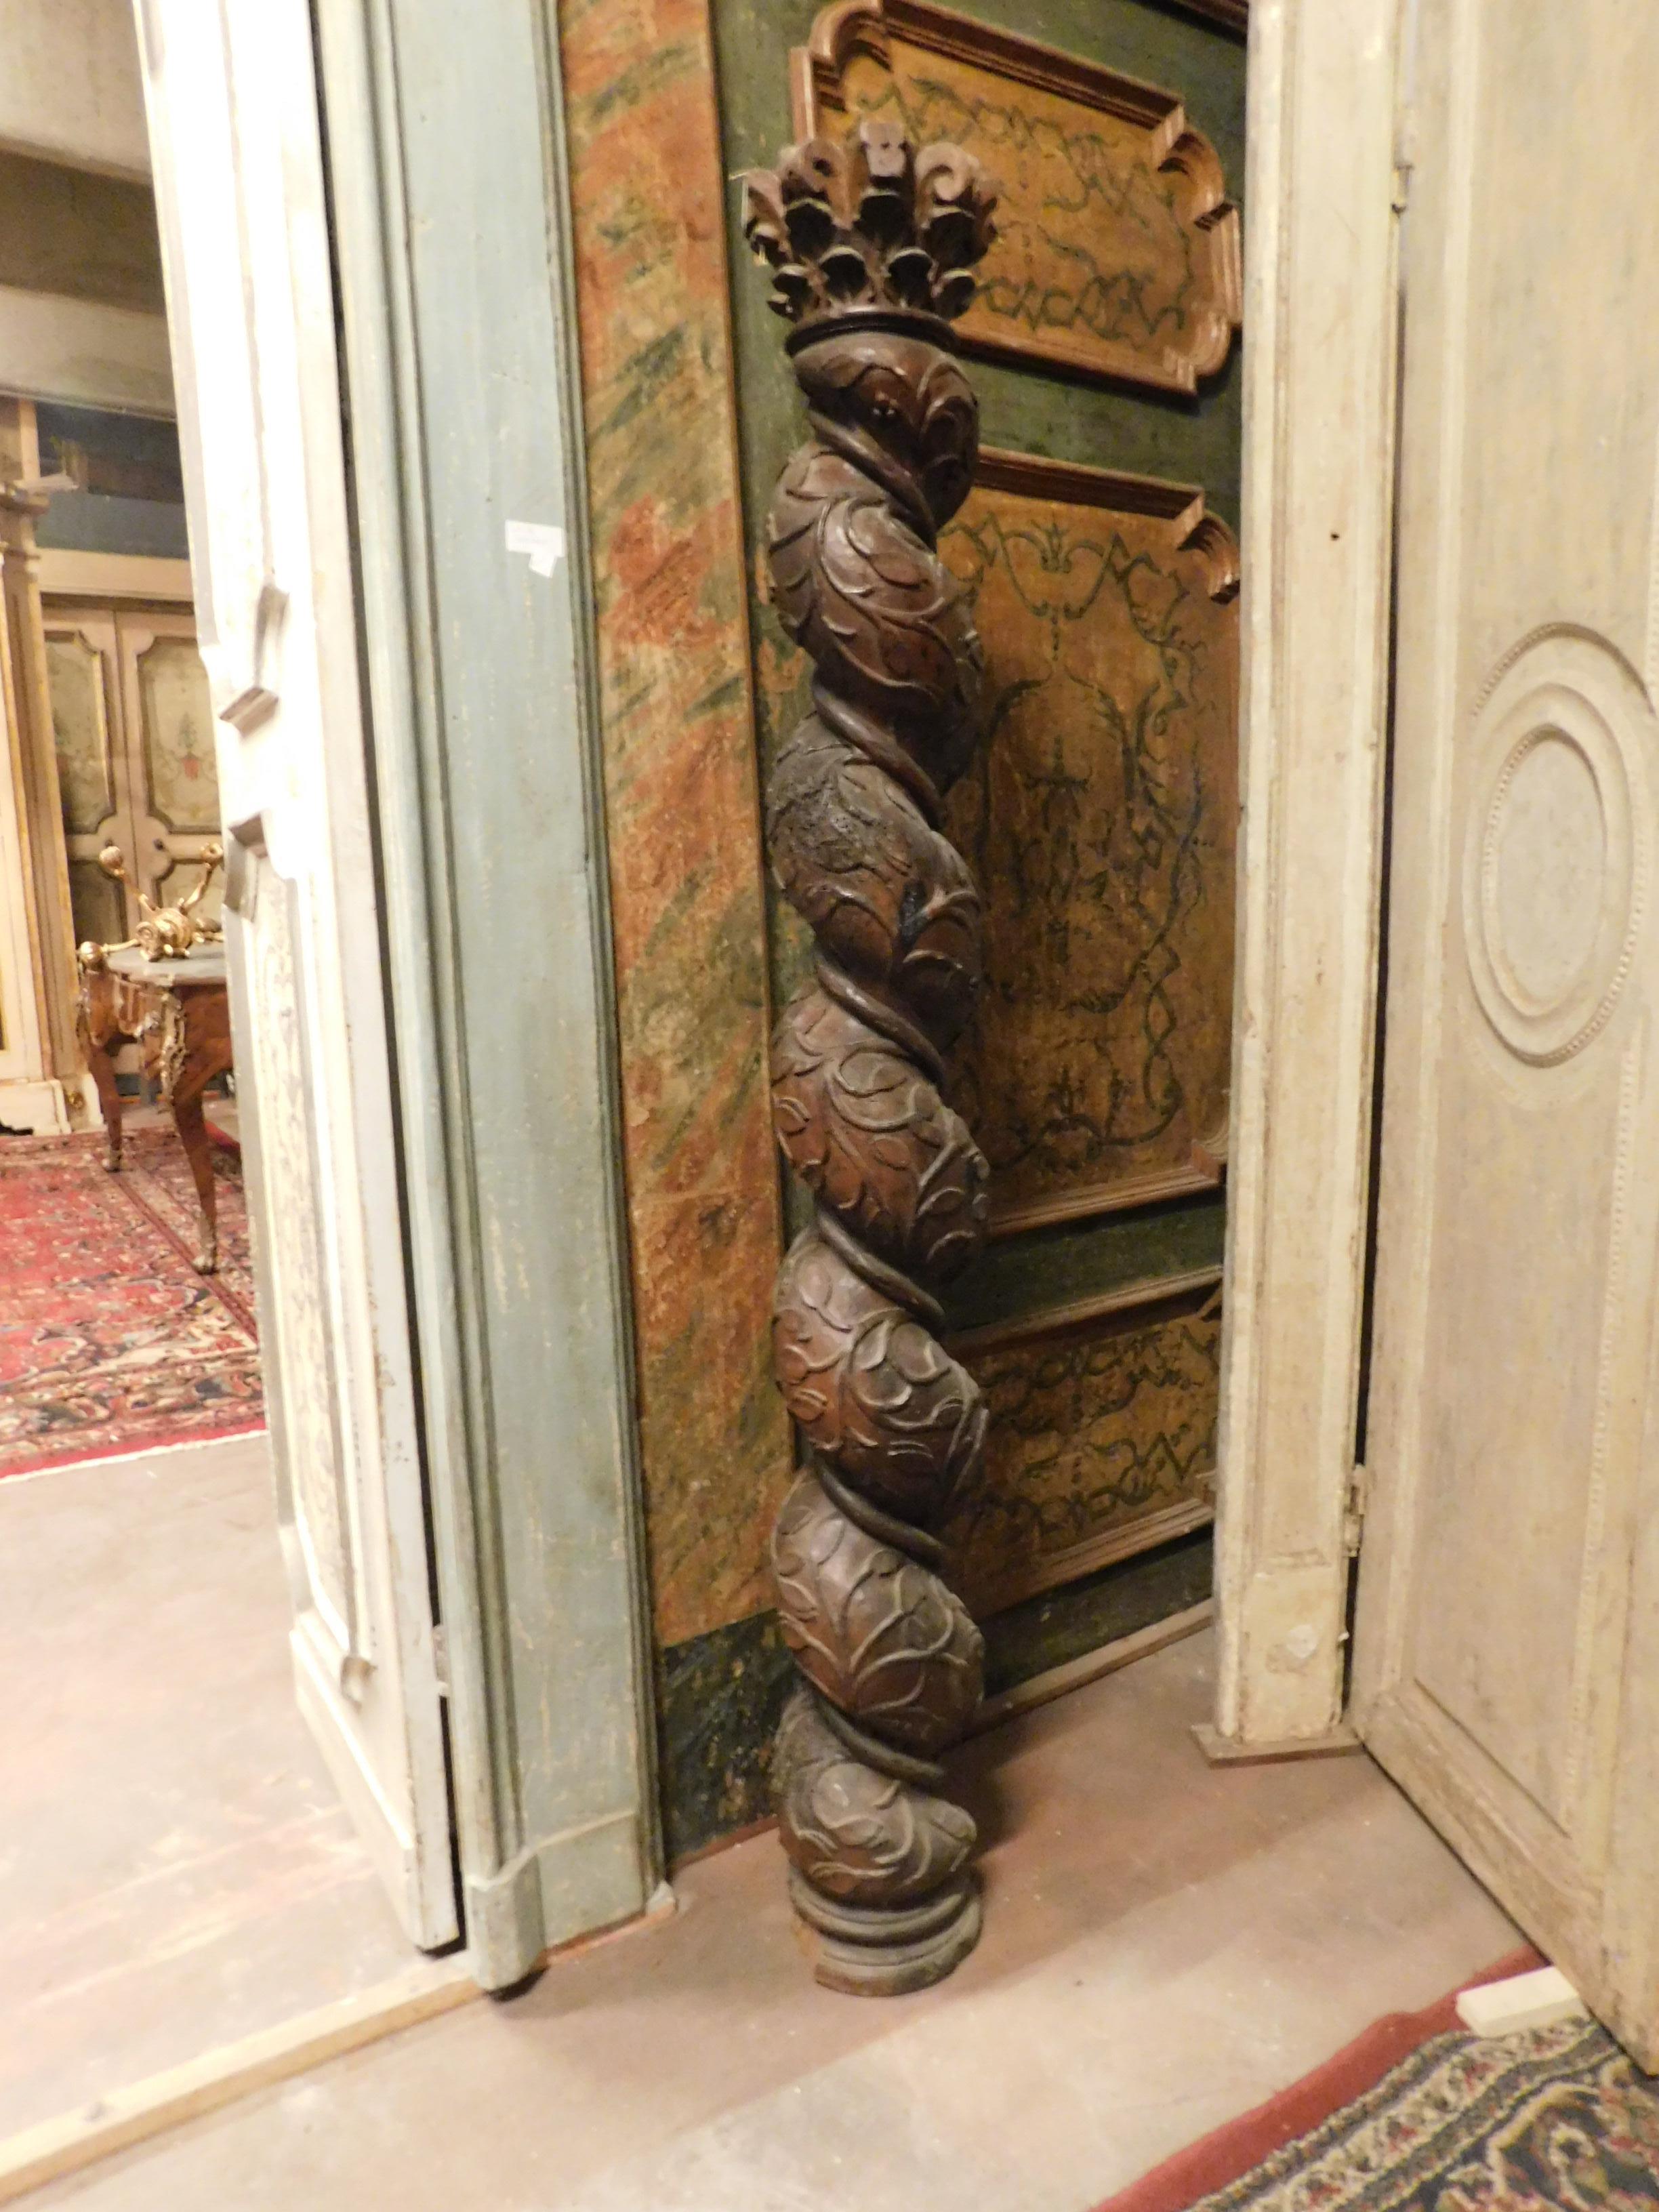 Ancient column in dark brown walnut wood, hand-sculpted with a twisted shape, richly decorated with floral motifs and original capital, from a 17th century house in Italy.

Measures H 170 + 10 (capital) x W 20 cm.